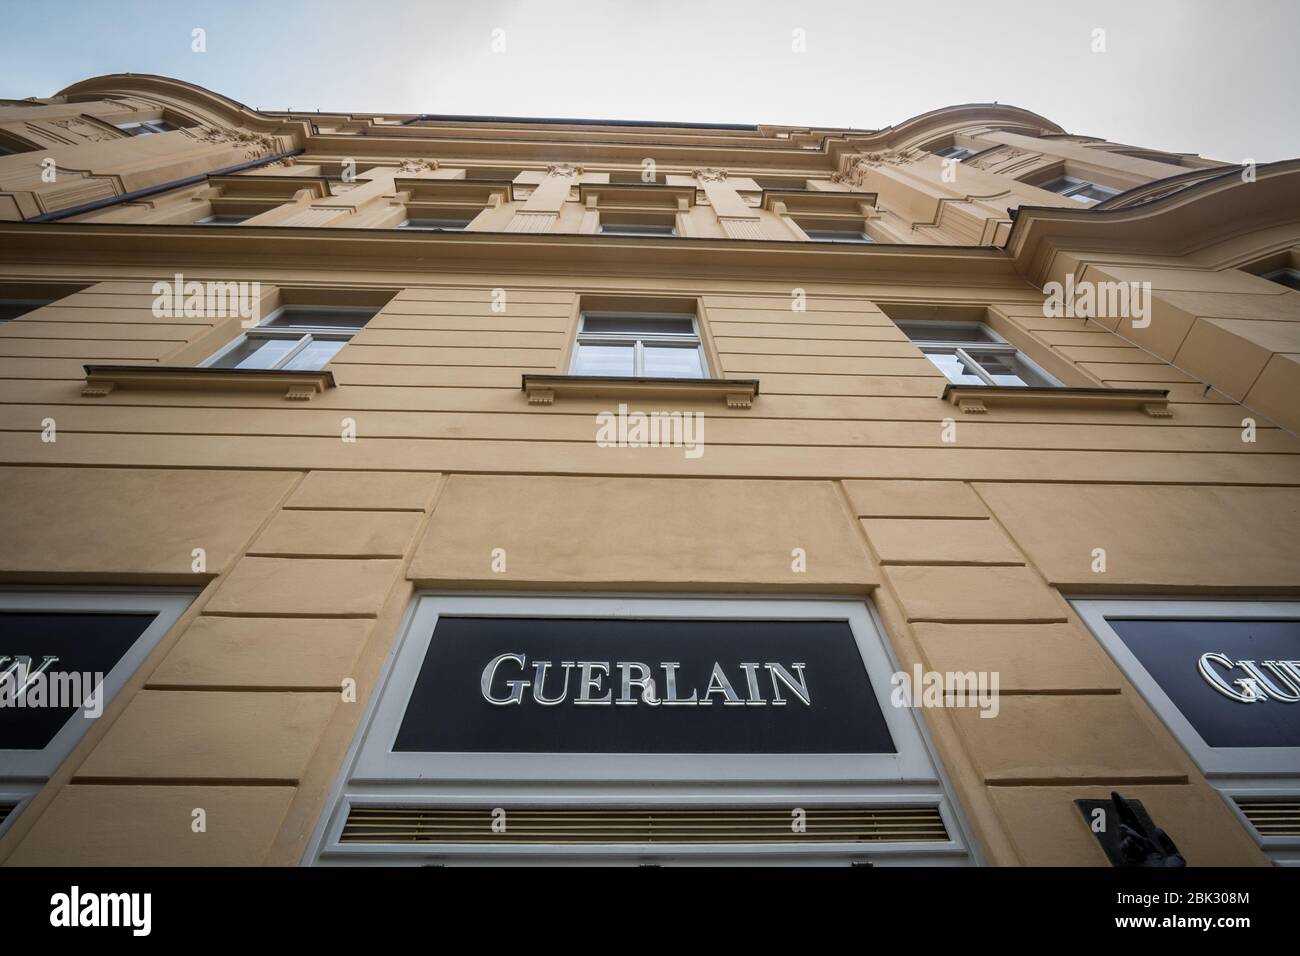 PRAGUE, CZECHIA - NOVEMBER 3, 2019: Guerlain logo on their boutique in Prague. Guerlain is a French house specialized in luxury frangrances, perfumes Stock Photo